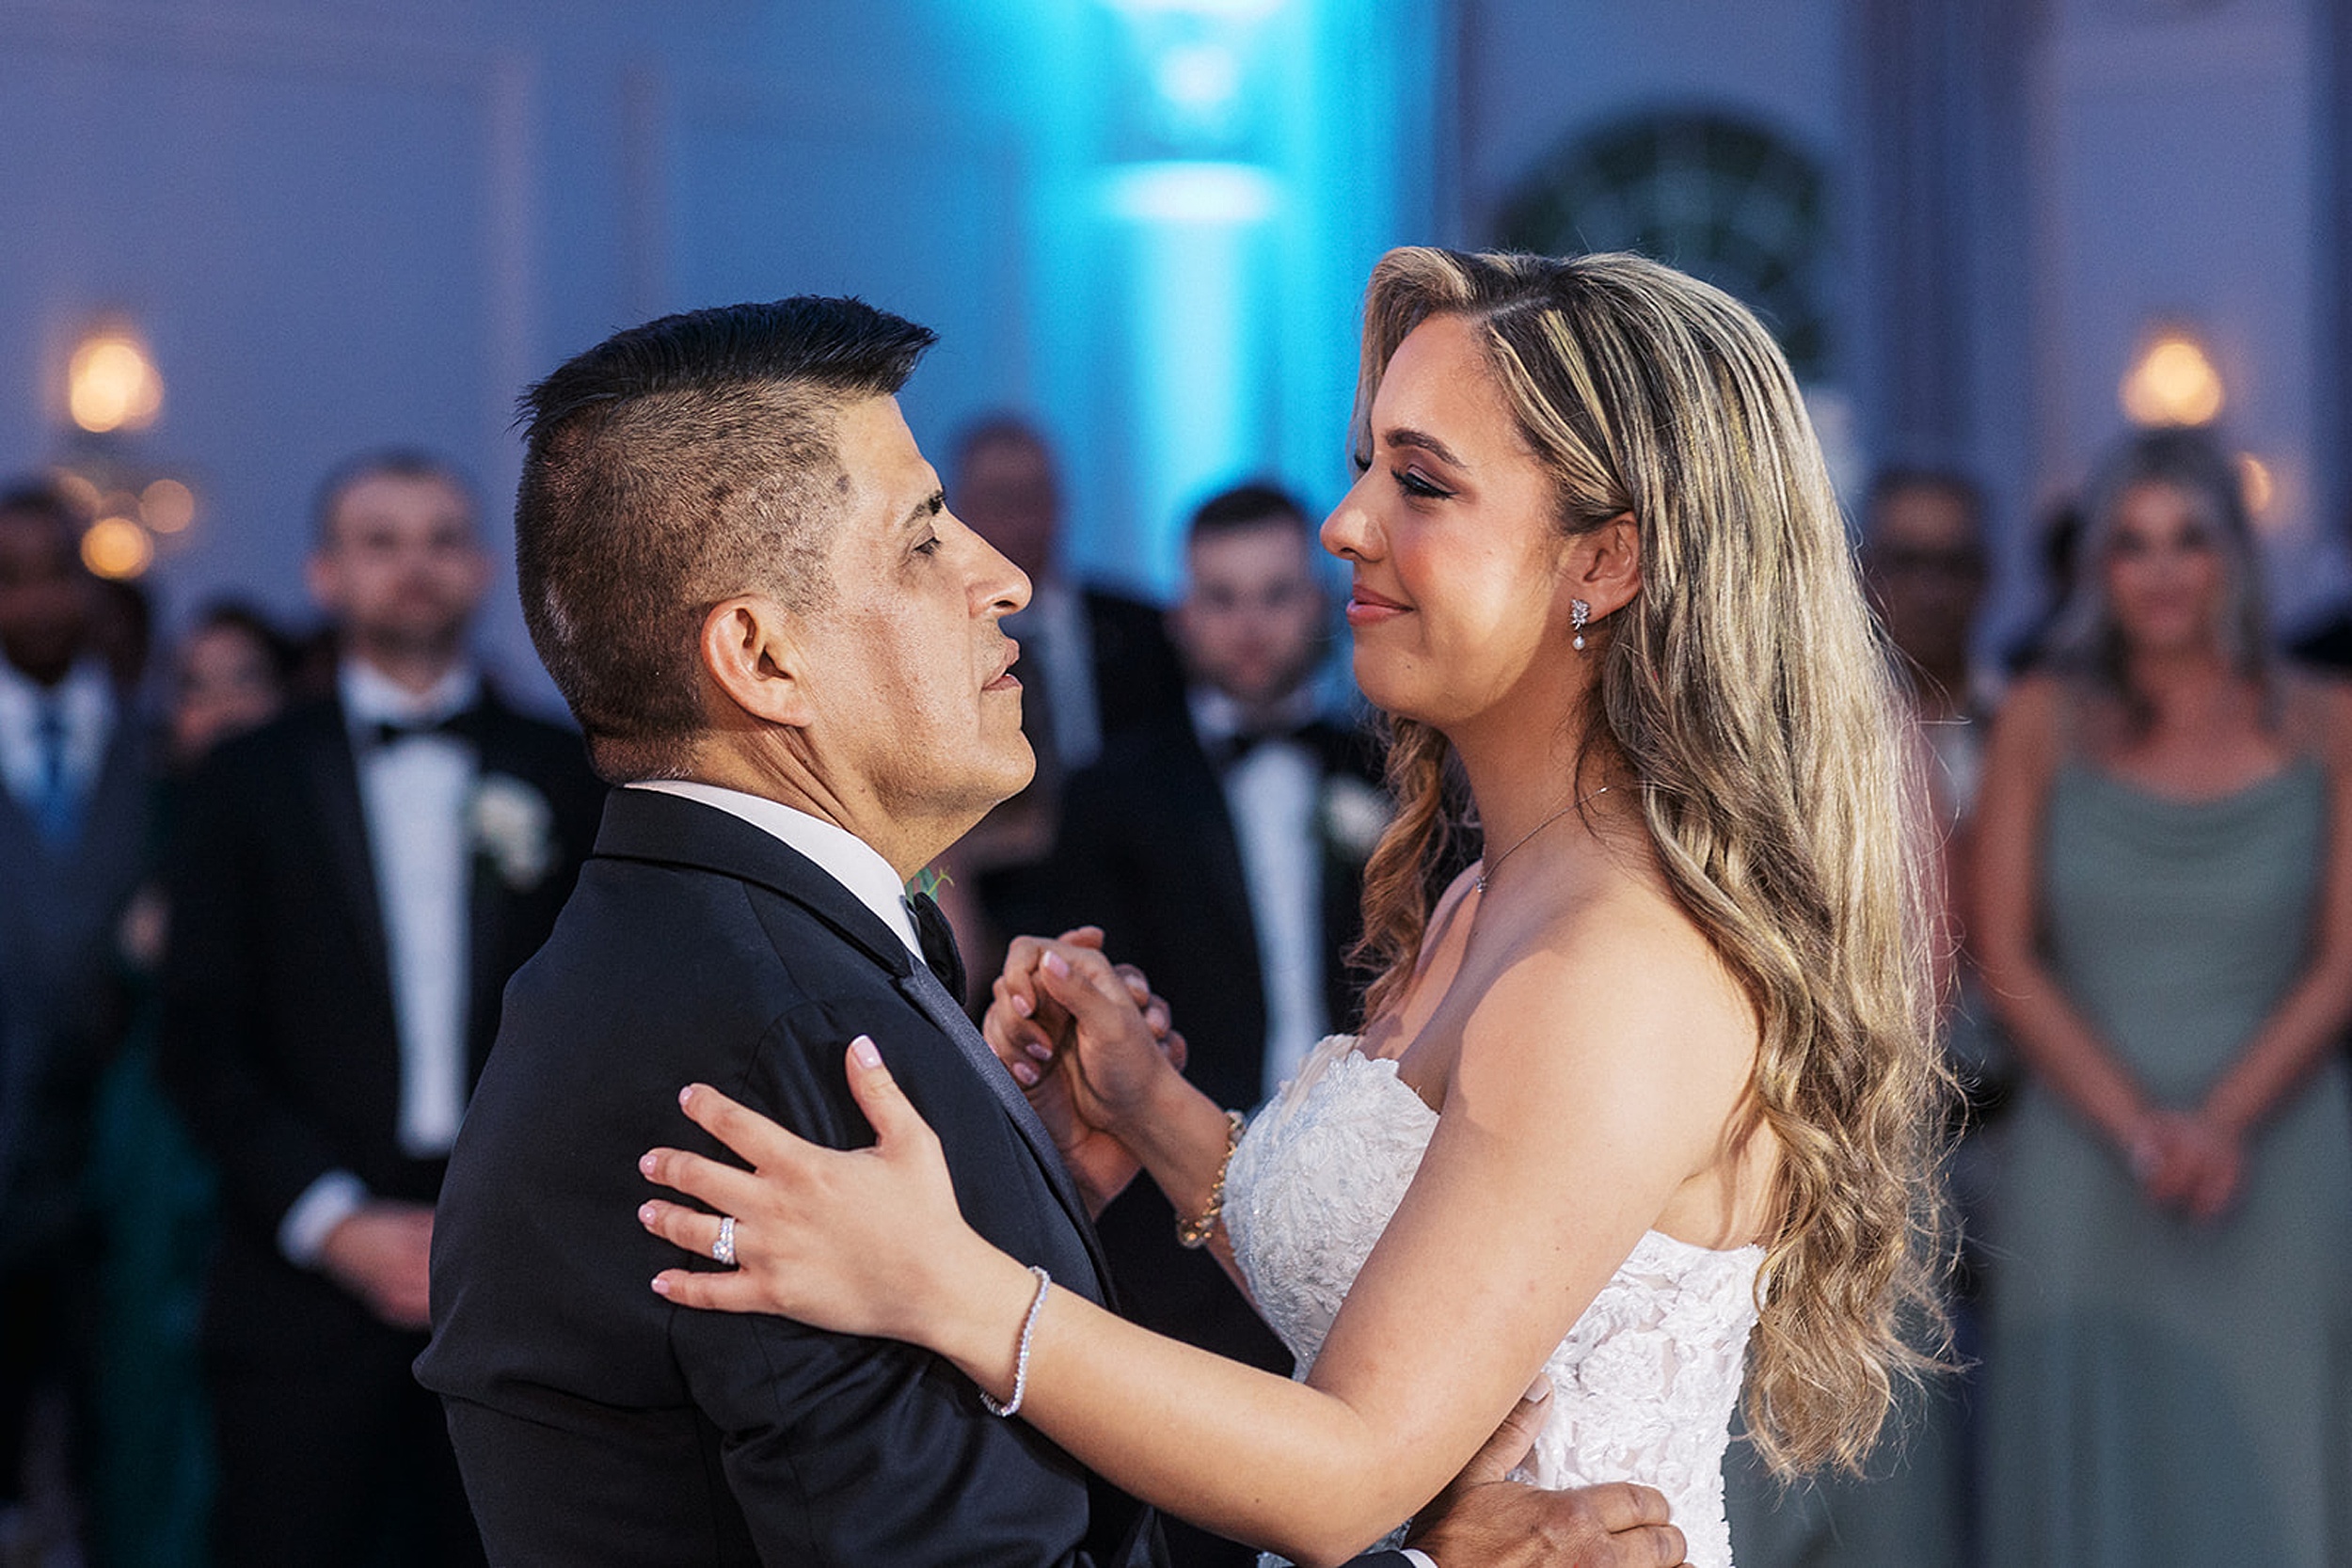 A bride dances with her father while her guests watch around the dance floor